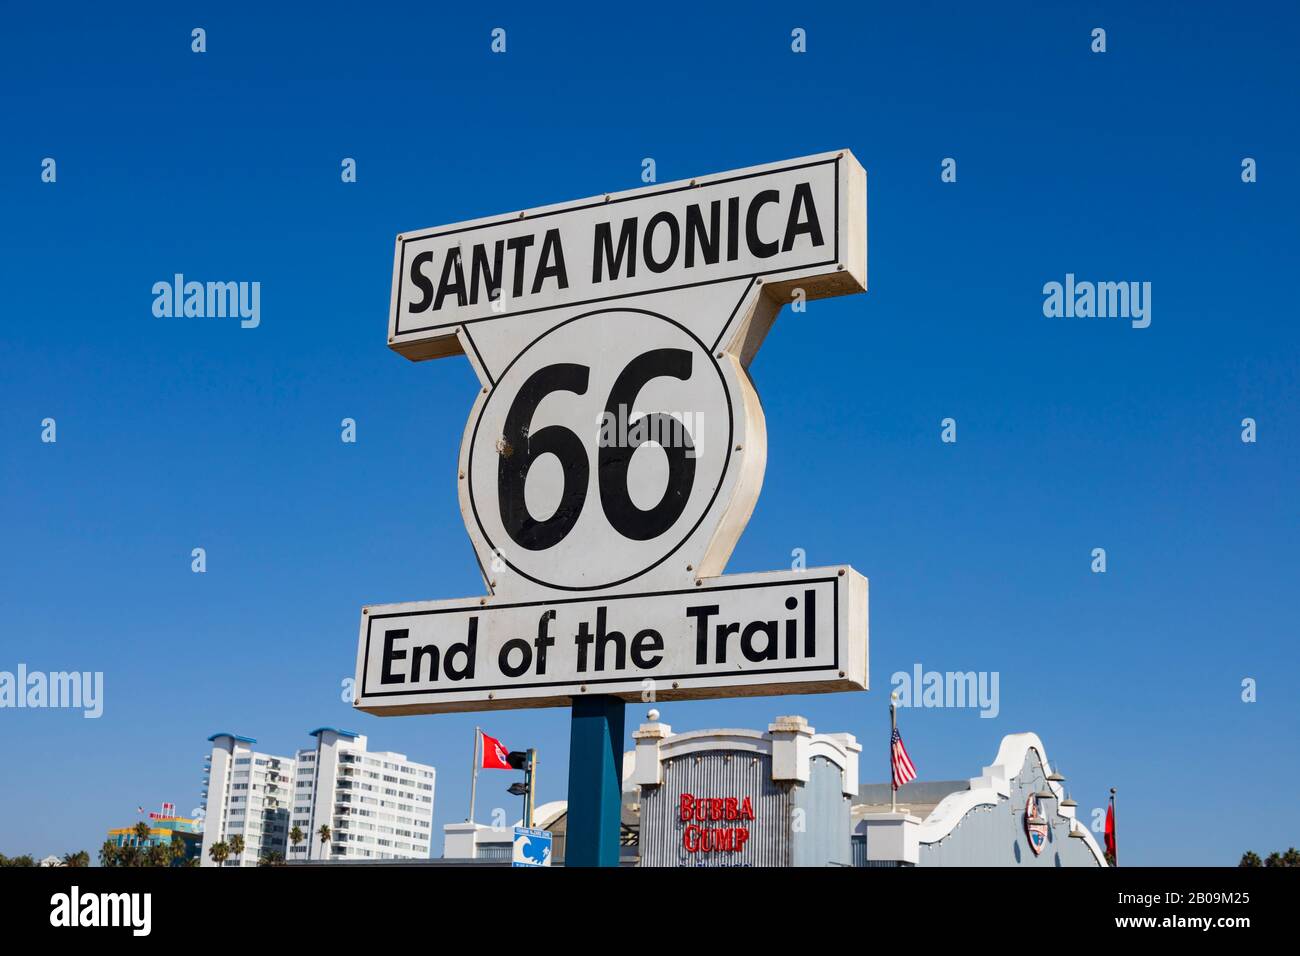 End of the trail, Route 66, sign post on the pier, Los Angeles, Santa Monica, California, United States of America Stock Photo